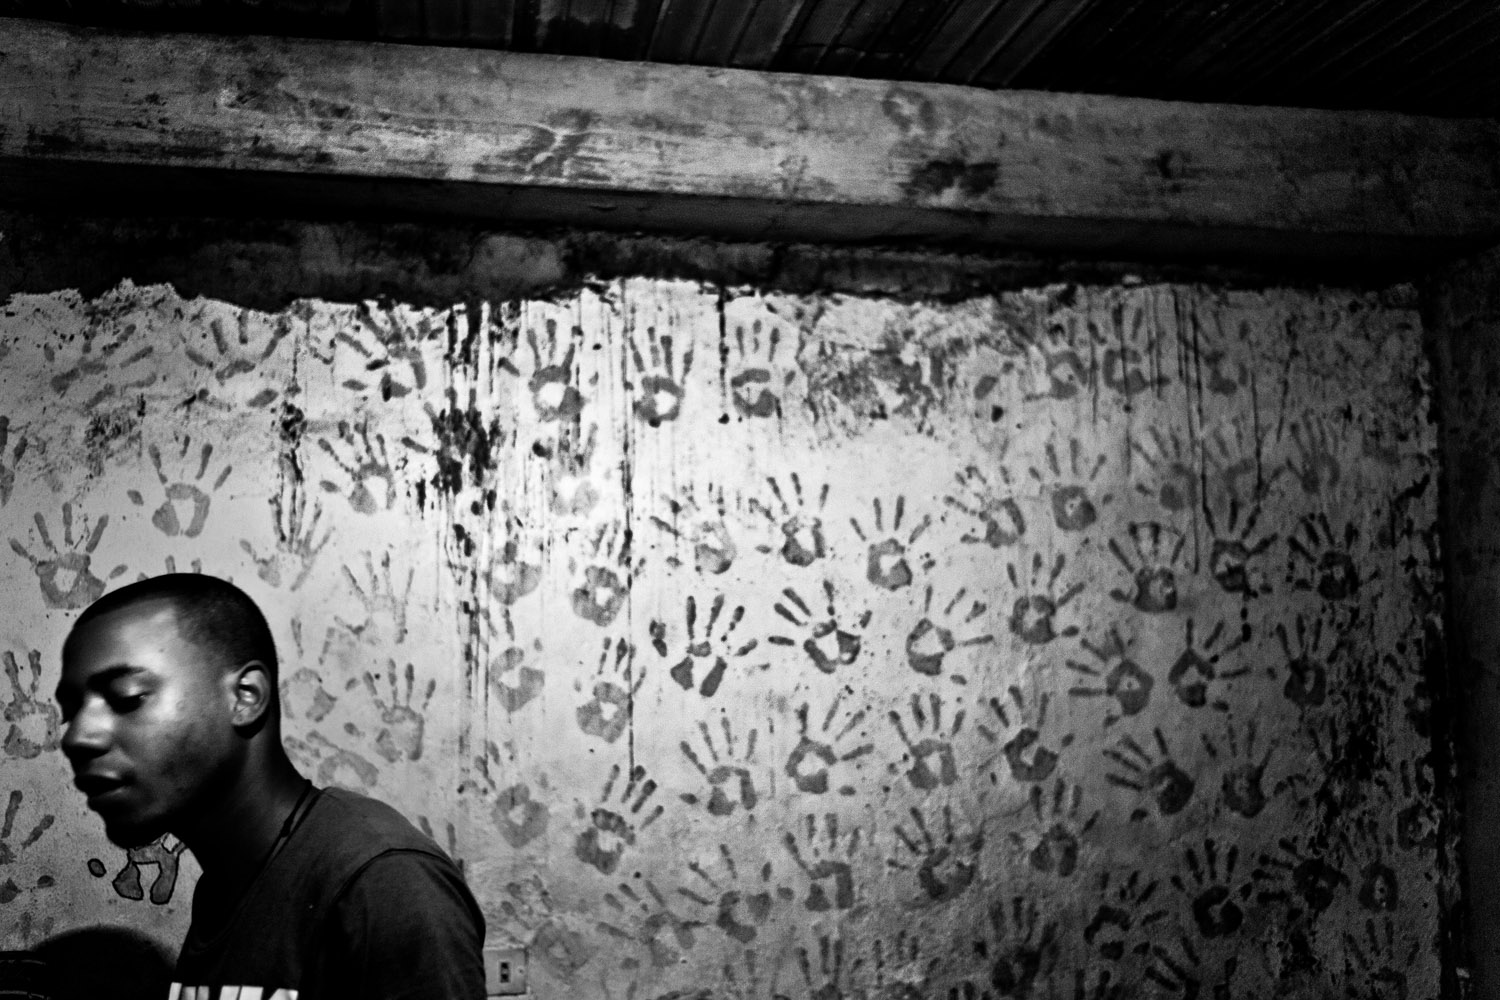 A hip hop artist plays music at his home for members of a local gang. The hand prints on the wall served as a popular symbol for Chavez in the 2006 presidential elections, representing the 10 million votes his supporters said he would obtain.